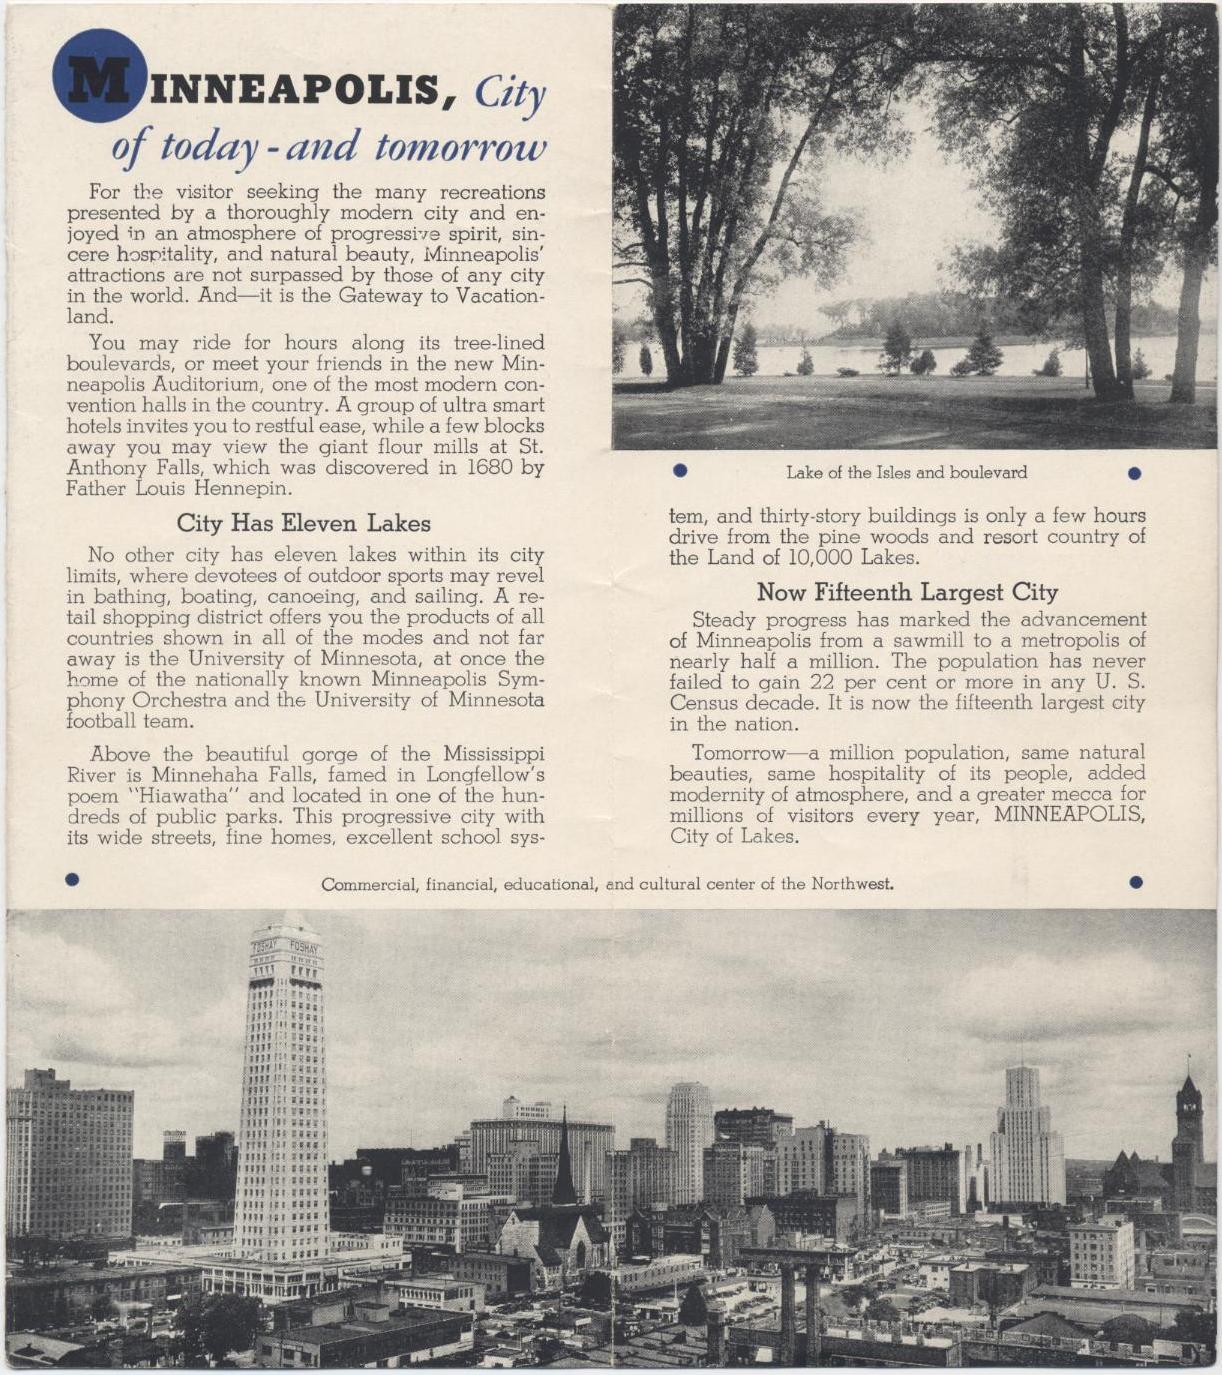 Official Guide to Minneapolis (1930's)B